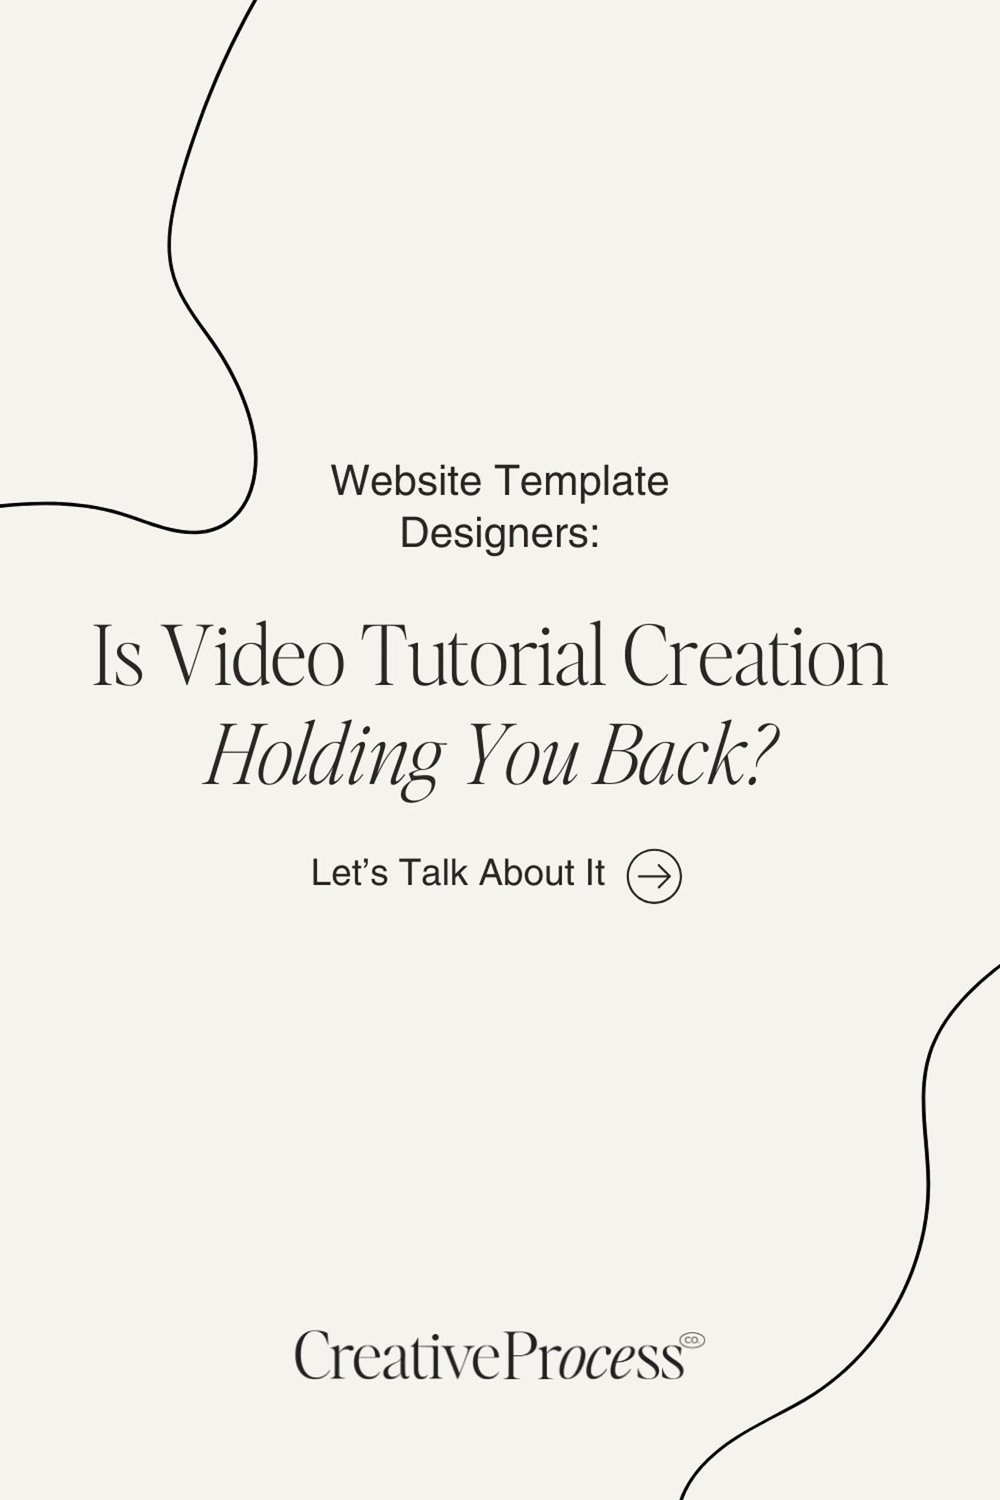 Website Designers_ Is Video Tutorial Creation Holding You Back From Selling Templates_-10.jpg